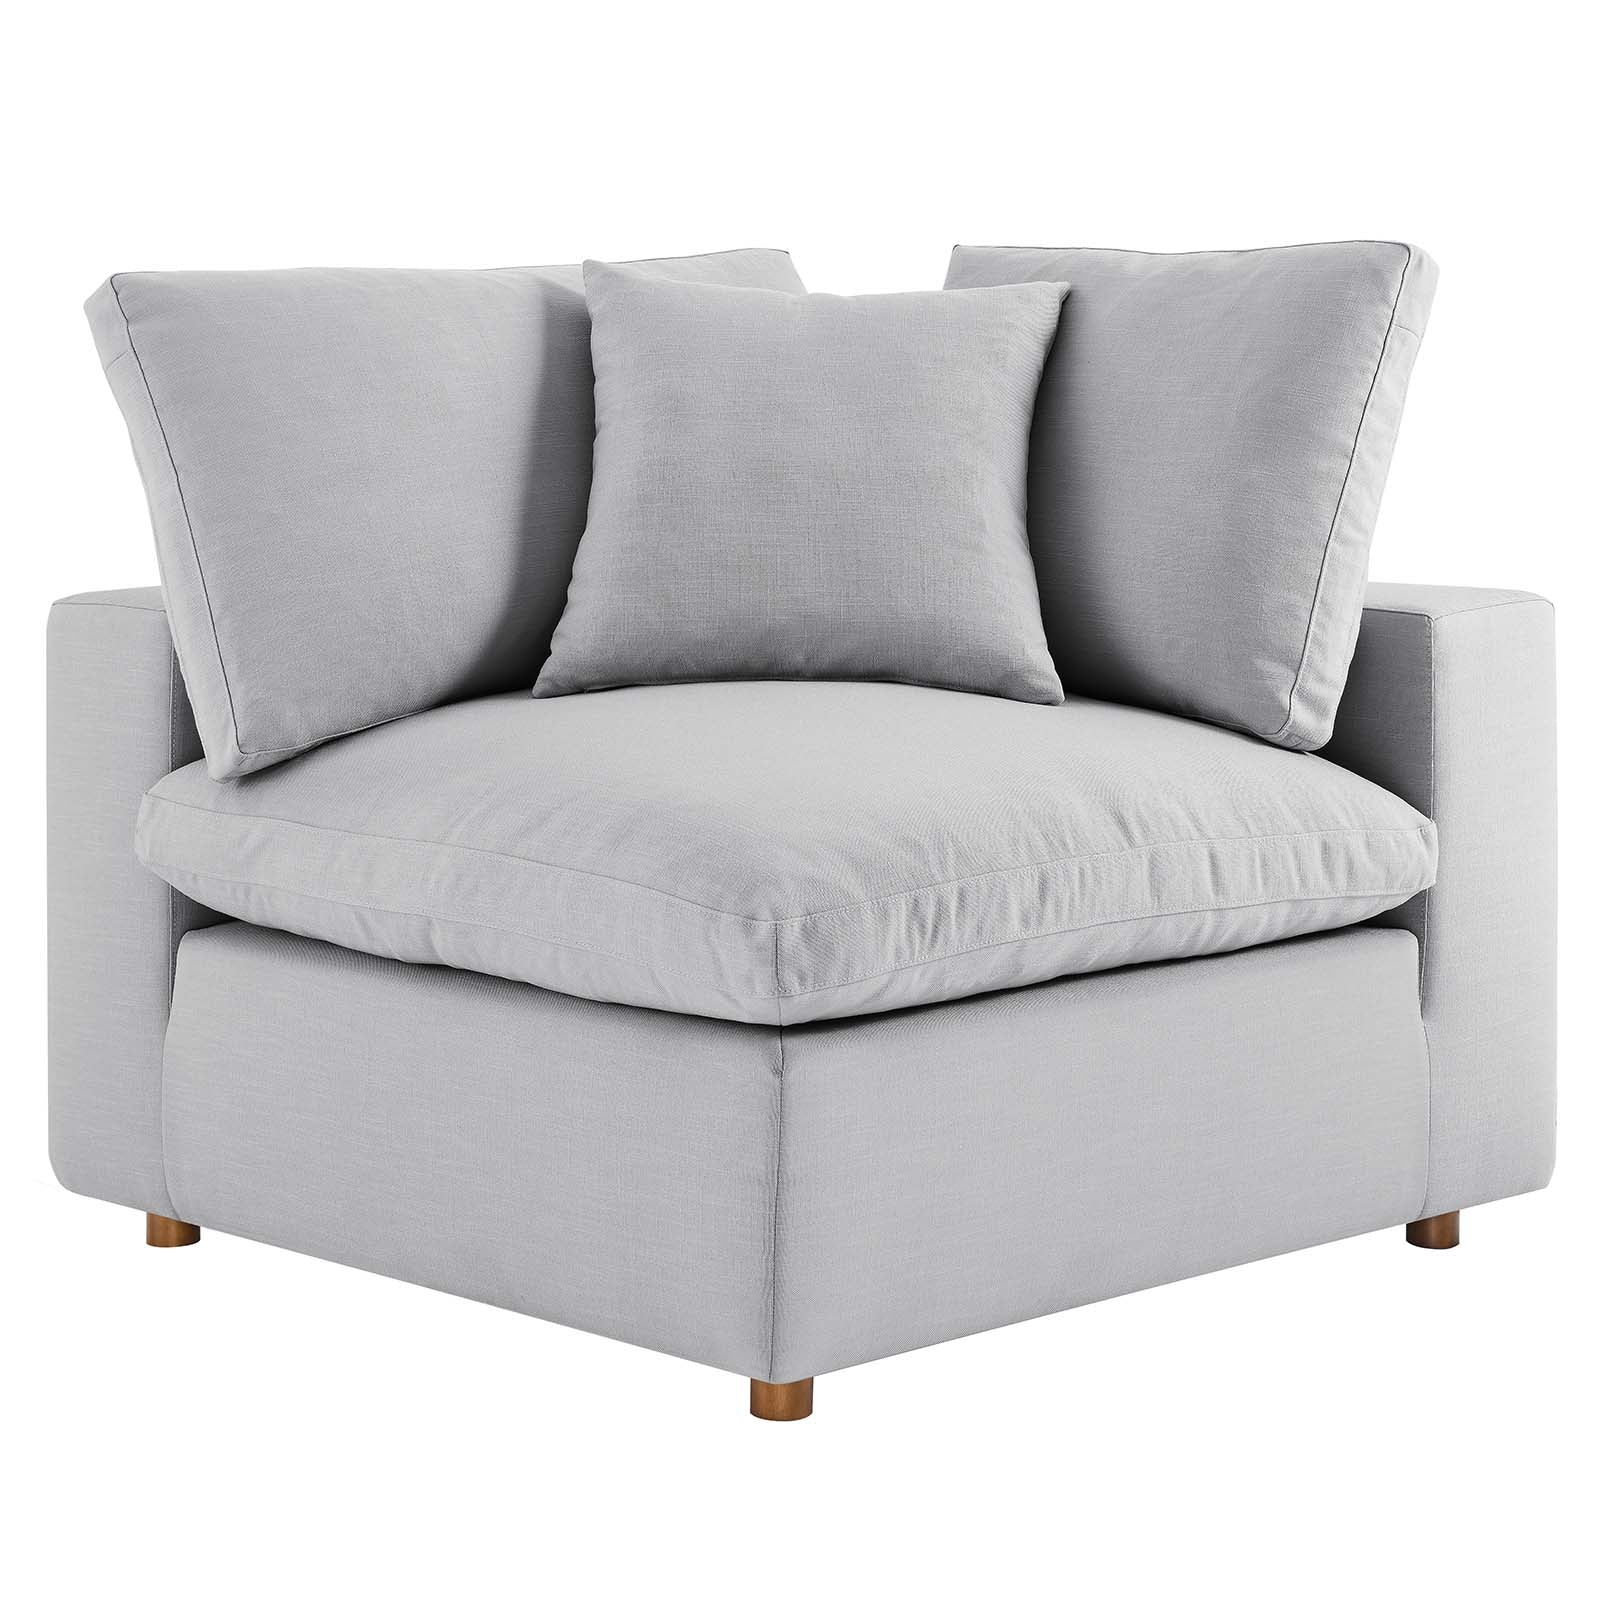 Modway Sectional Sofas - Commix Down Filled Overstuffed 2 Piece Sectional Sofa Set Light Gray